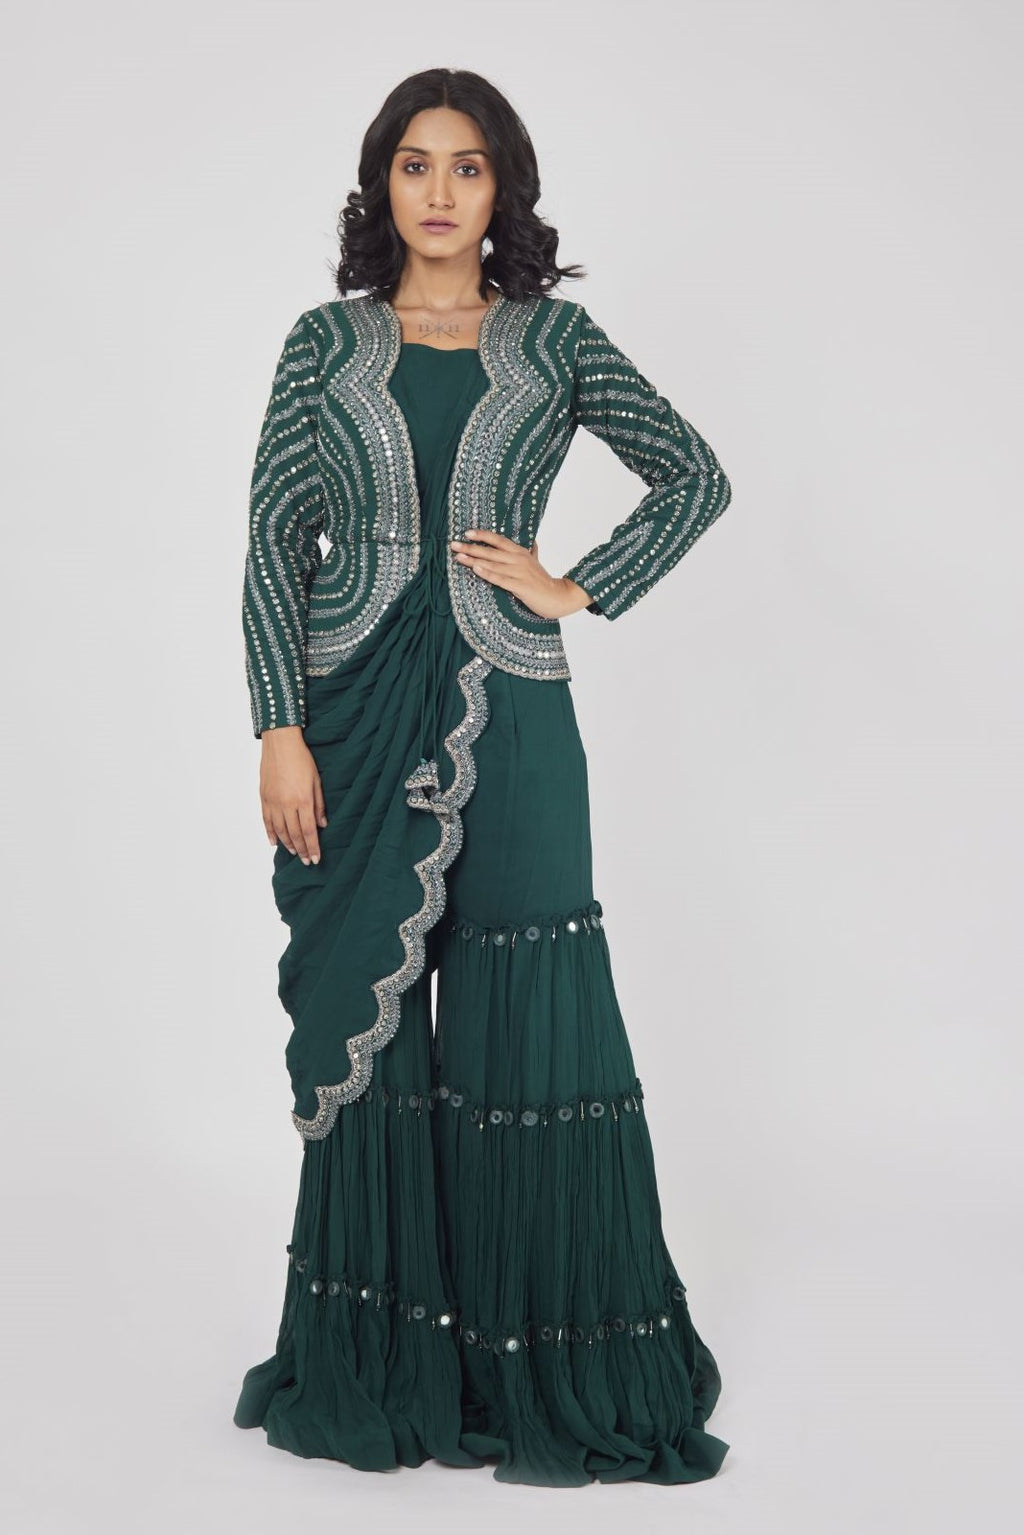 Shop a green embroidered drape saree set with jacket and plazo. Make a fashion statement on festive occasions and weddings with designer sarees, designer suits, Indian dresses, Anarkali suits, palazzo suits, designer gowns, sharara suits, and embroidered sarees from Pure Elegance Indian fashion store in the USA.